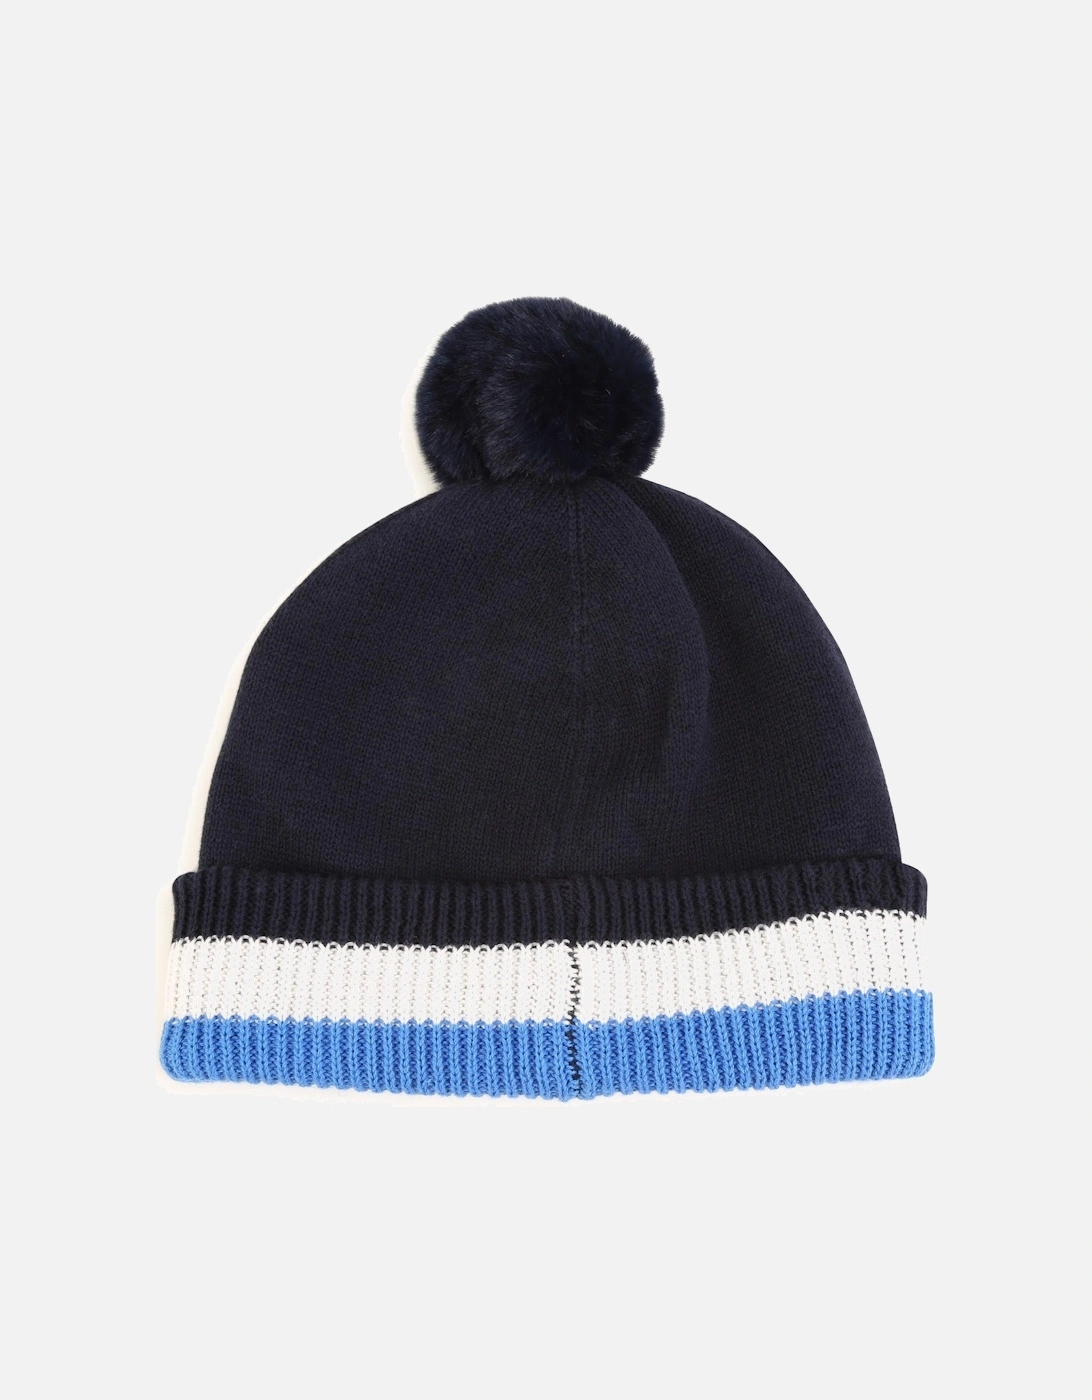 BABY/TODDLER NAVY KNITTED HAT